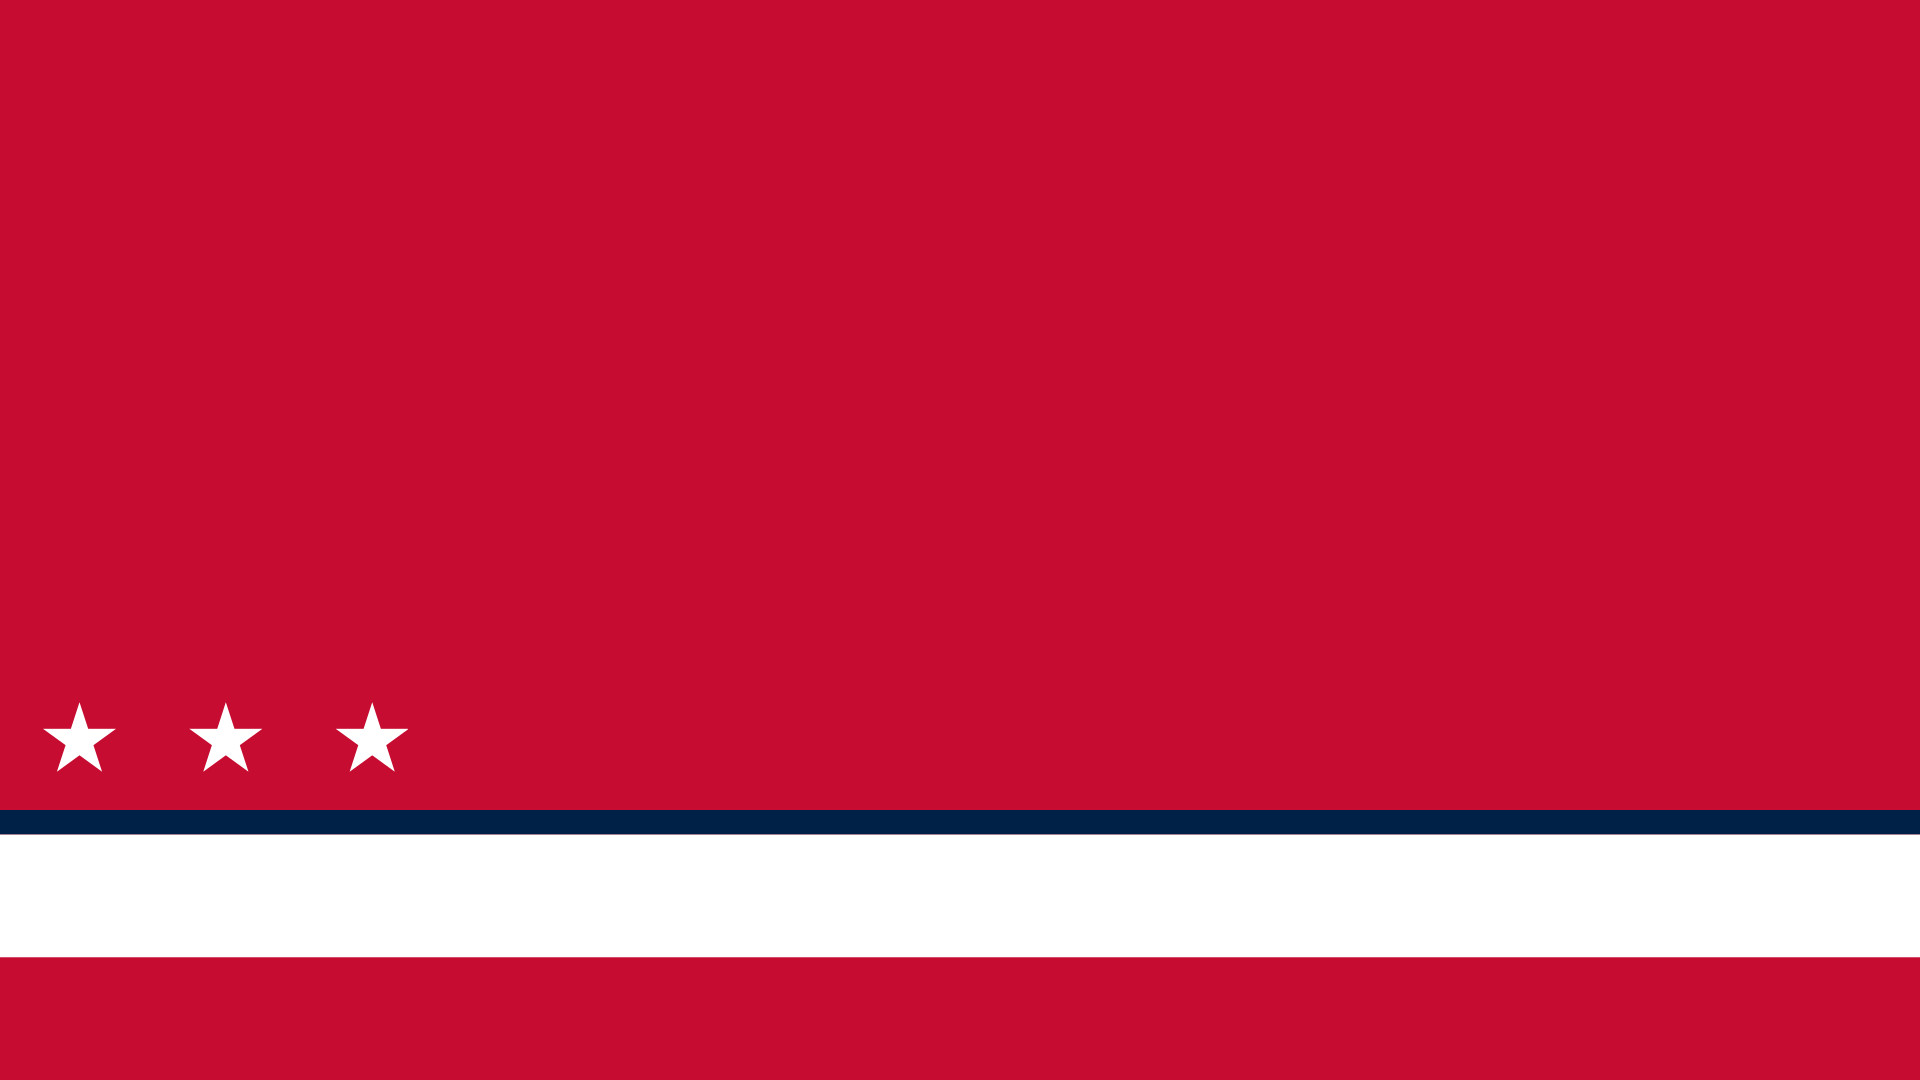 1920x1080 Washington Capitals: This is my favourite one, I used the sleeve as  inspiration, but just the bars was really lame, adding the stars just makes  it instantly ...